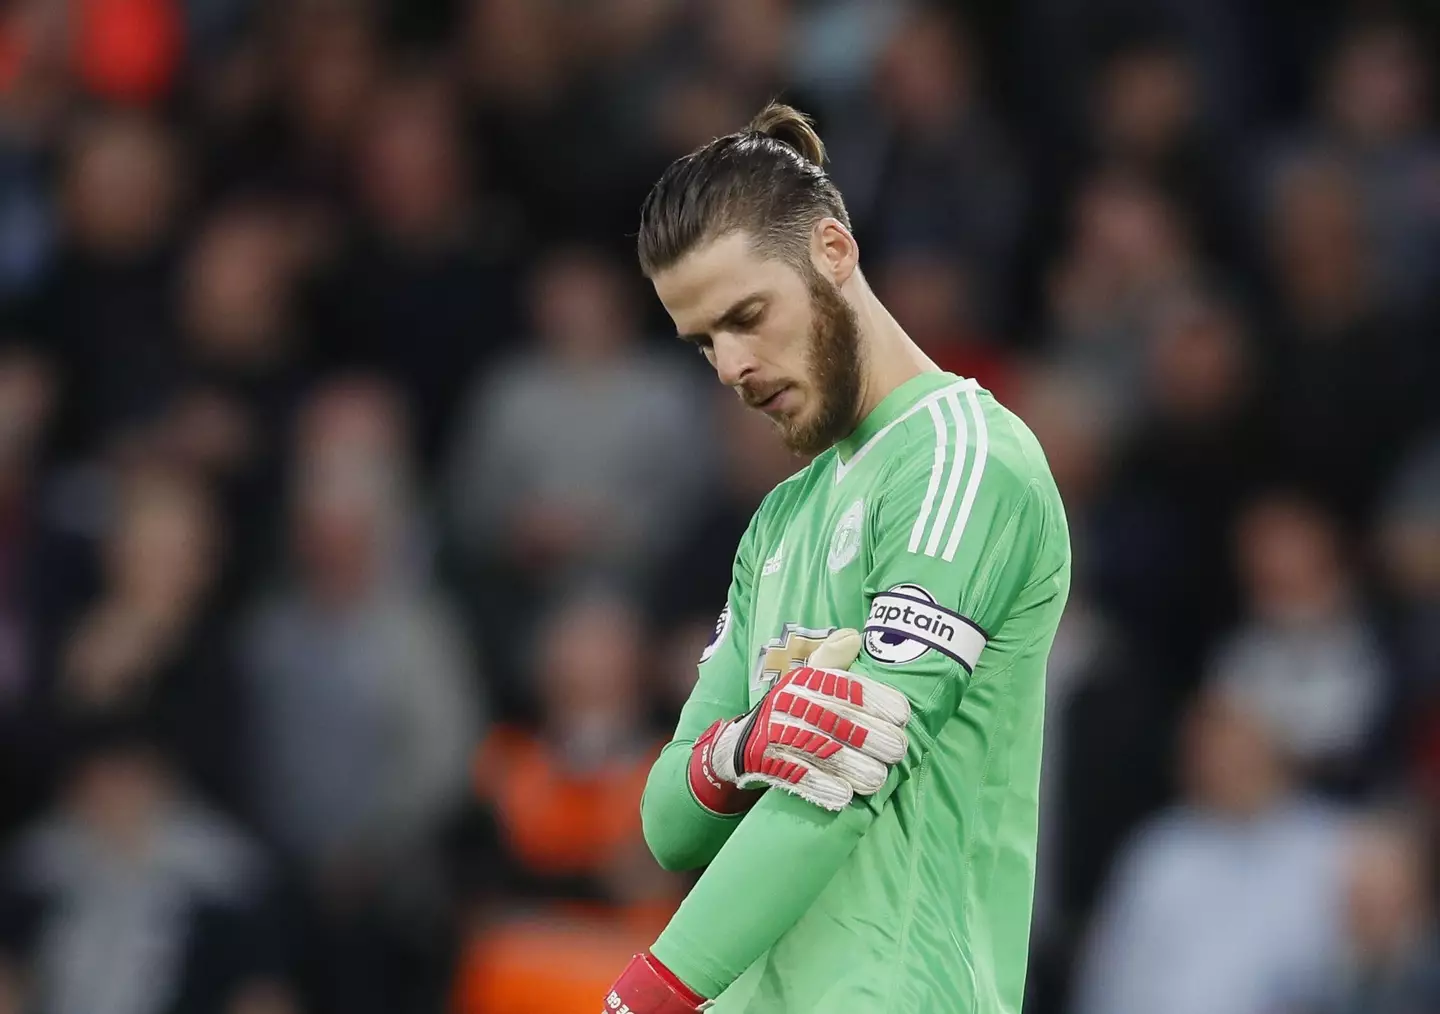 De Gea has worn the captain's armband for United on occasion. Image: Alamy